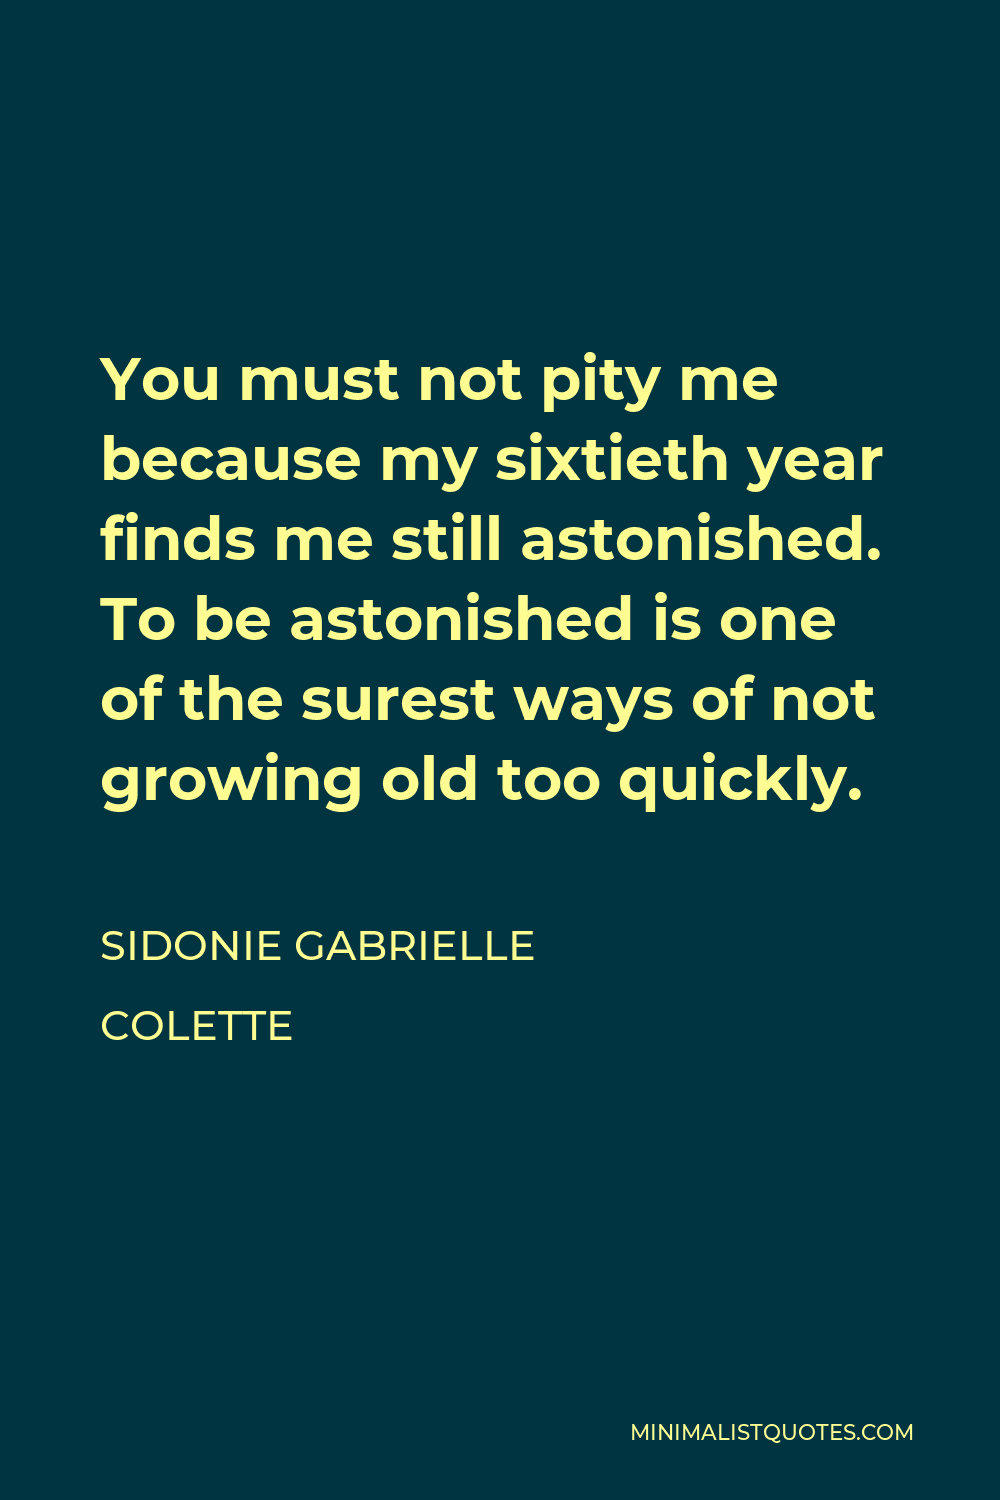 Sidonie Gabrielle Colette Quote - You must not pity me because my sixtieth year finds me still astonished. To be astonished is one of the surest ways of not growing old too quickly.